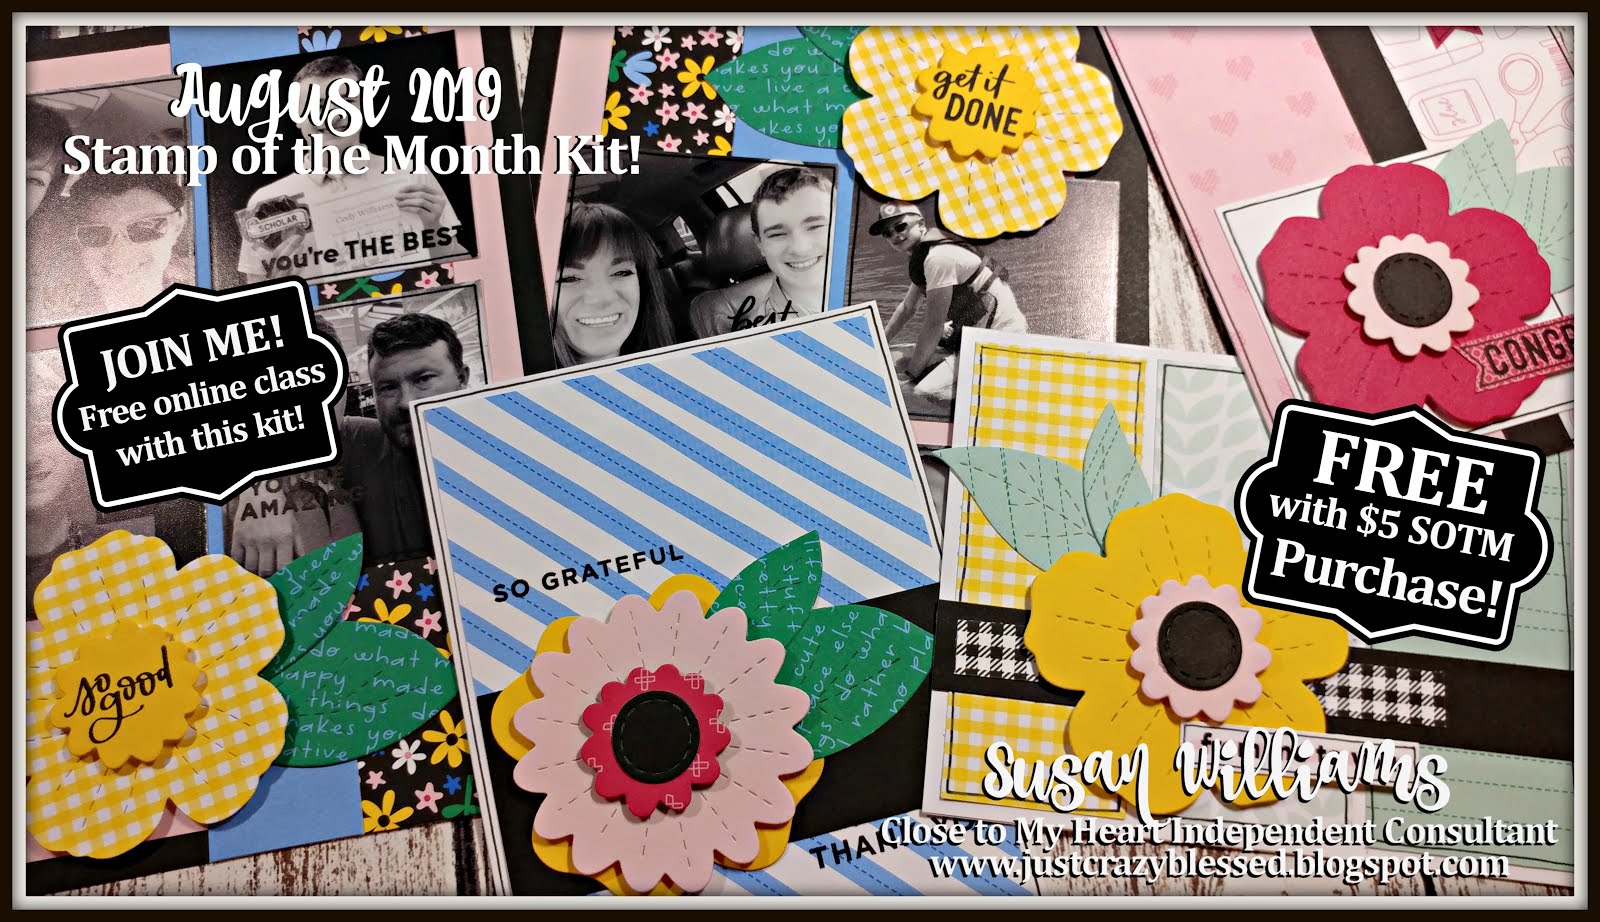 August 2019 Stamp of the Month Workshop!